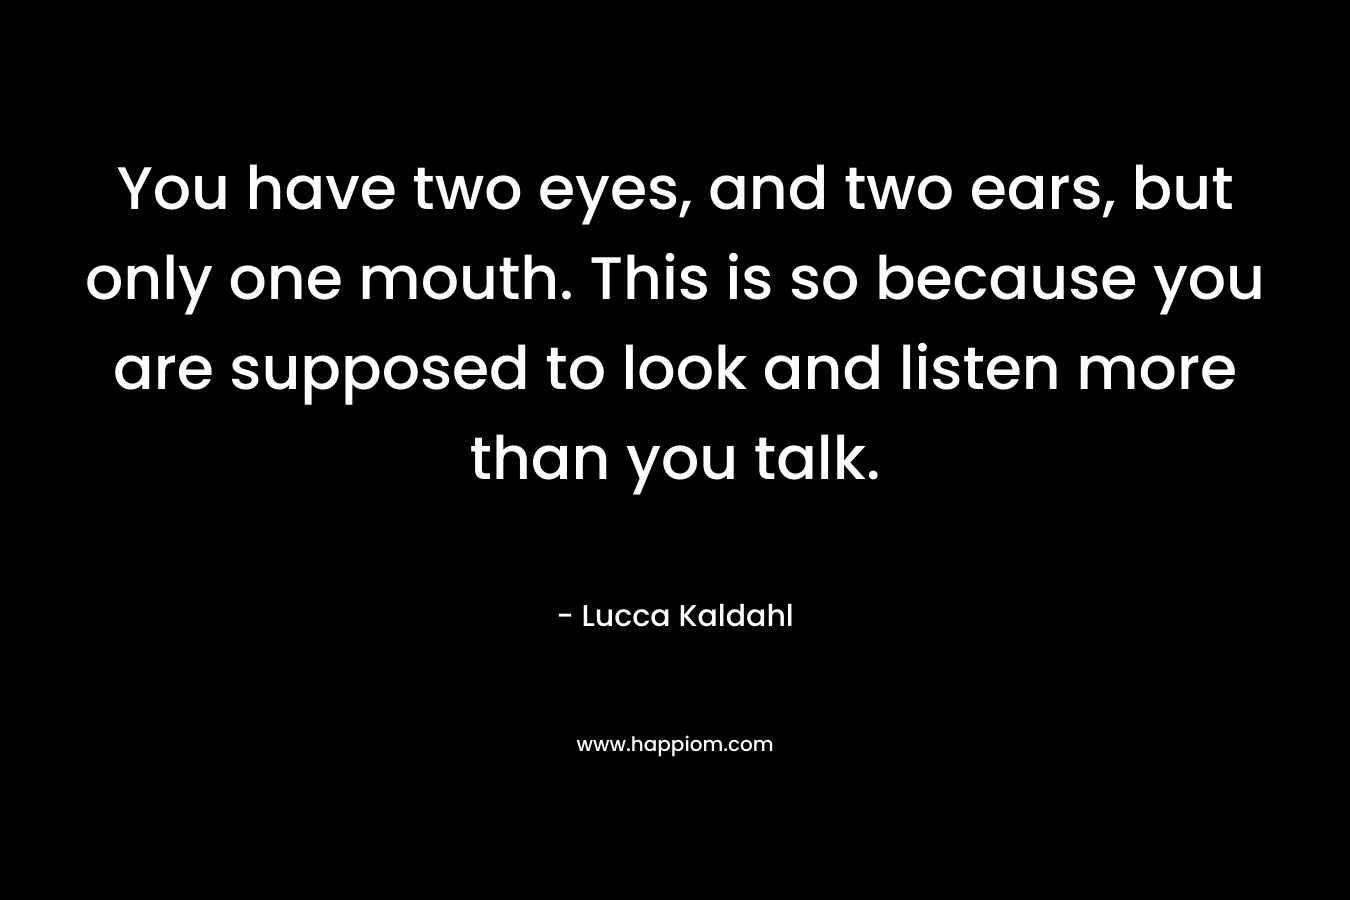 You have two eyes, and two ears, but only one mouth. This is so because you are supposed to look and listen more than you talk. – Lucca Kaldahl